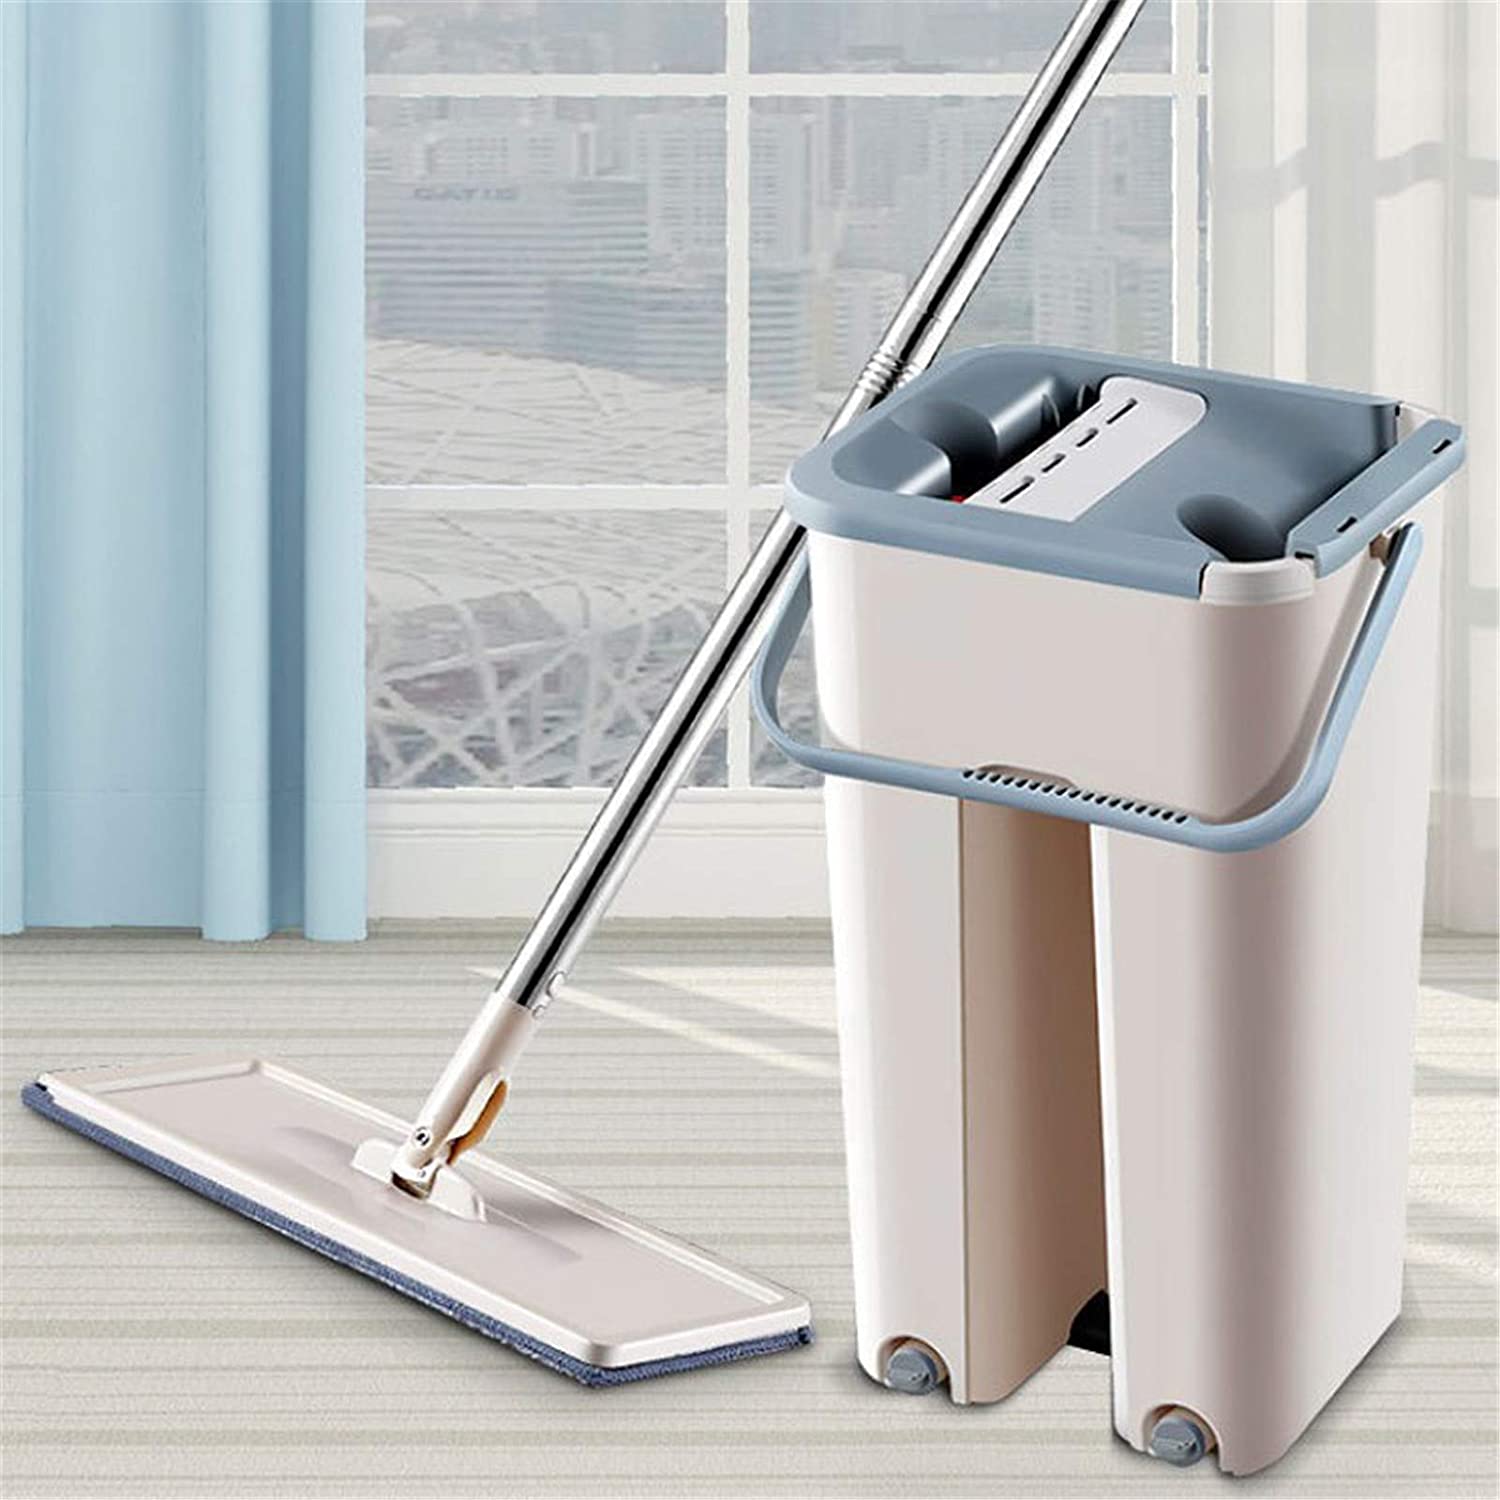 Flat Floor Mop and Bucket Set Wet Dry Floor Cleaning Hand Free 360° Flexible Head Mop with 2 Reusable Mop Pads - e4cents